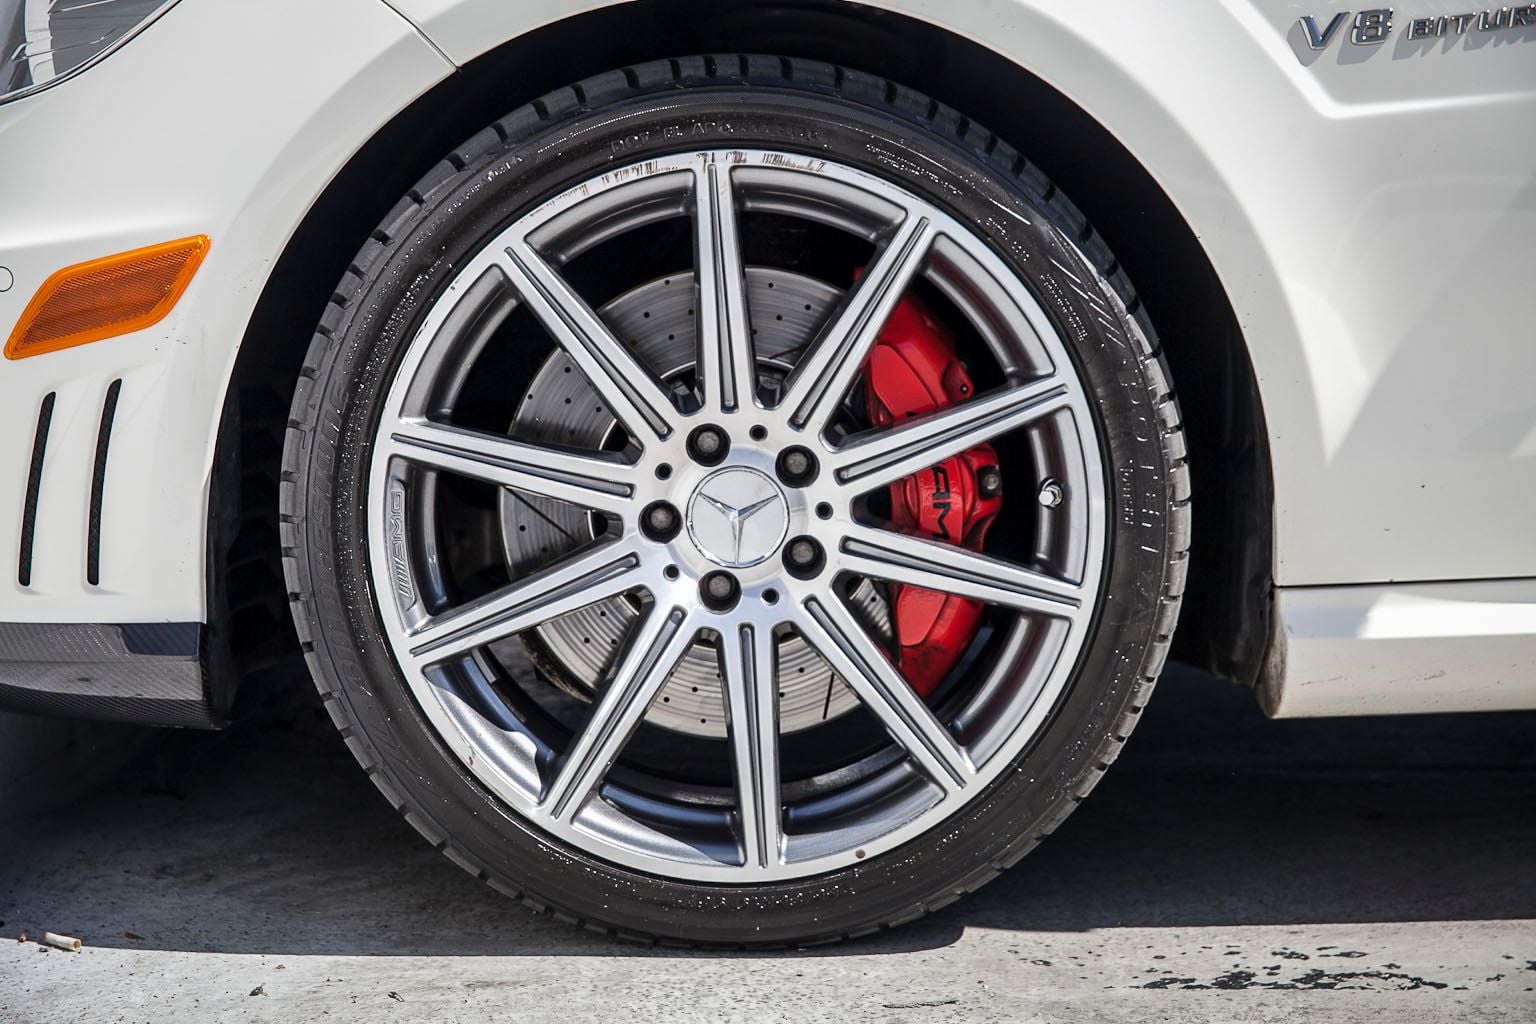 Wheels and Tires/Axles - Mercedes AMG E63 OEM 10 Spoke ( Gray ) Wheels And Tires - Used - 2010 to 2016 Mercedes-Benz E63 AMG - Chino, CA 91710, United States